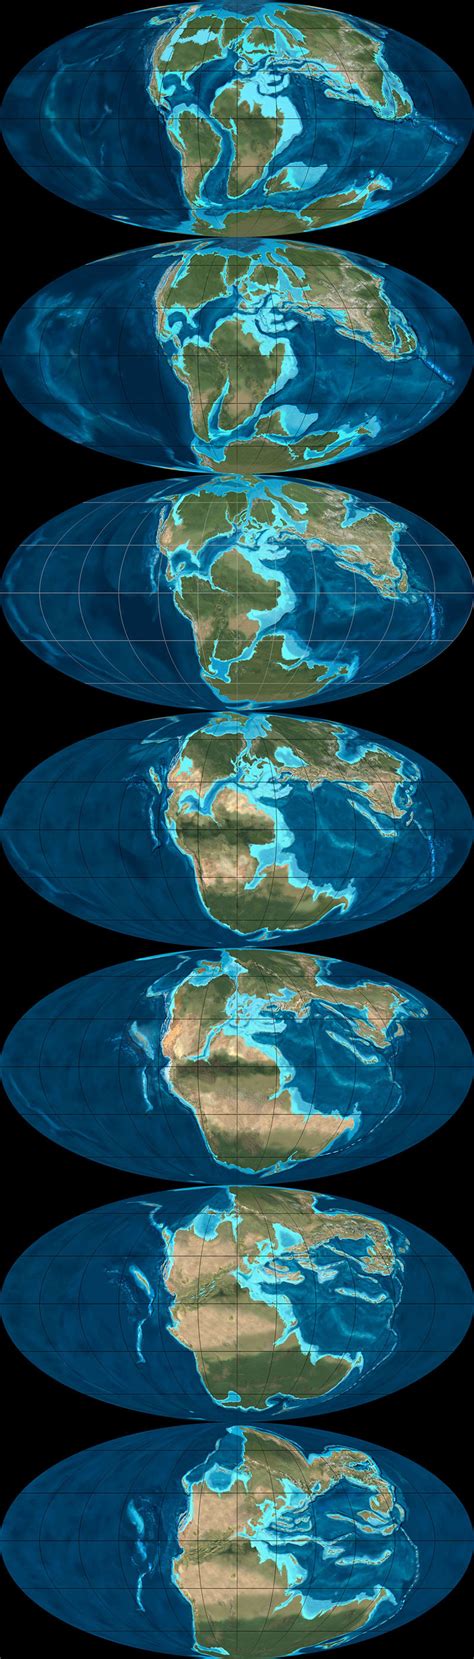 What Did The Continents Look Like Millions Of Years Ago The Atlantic